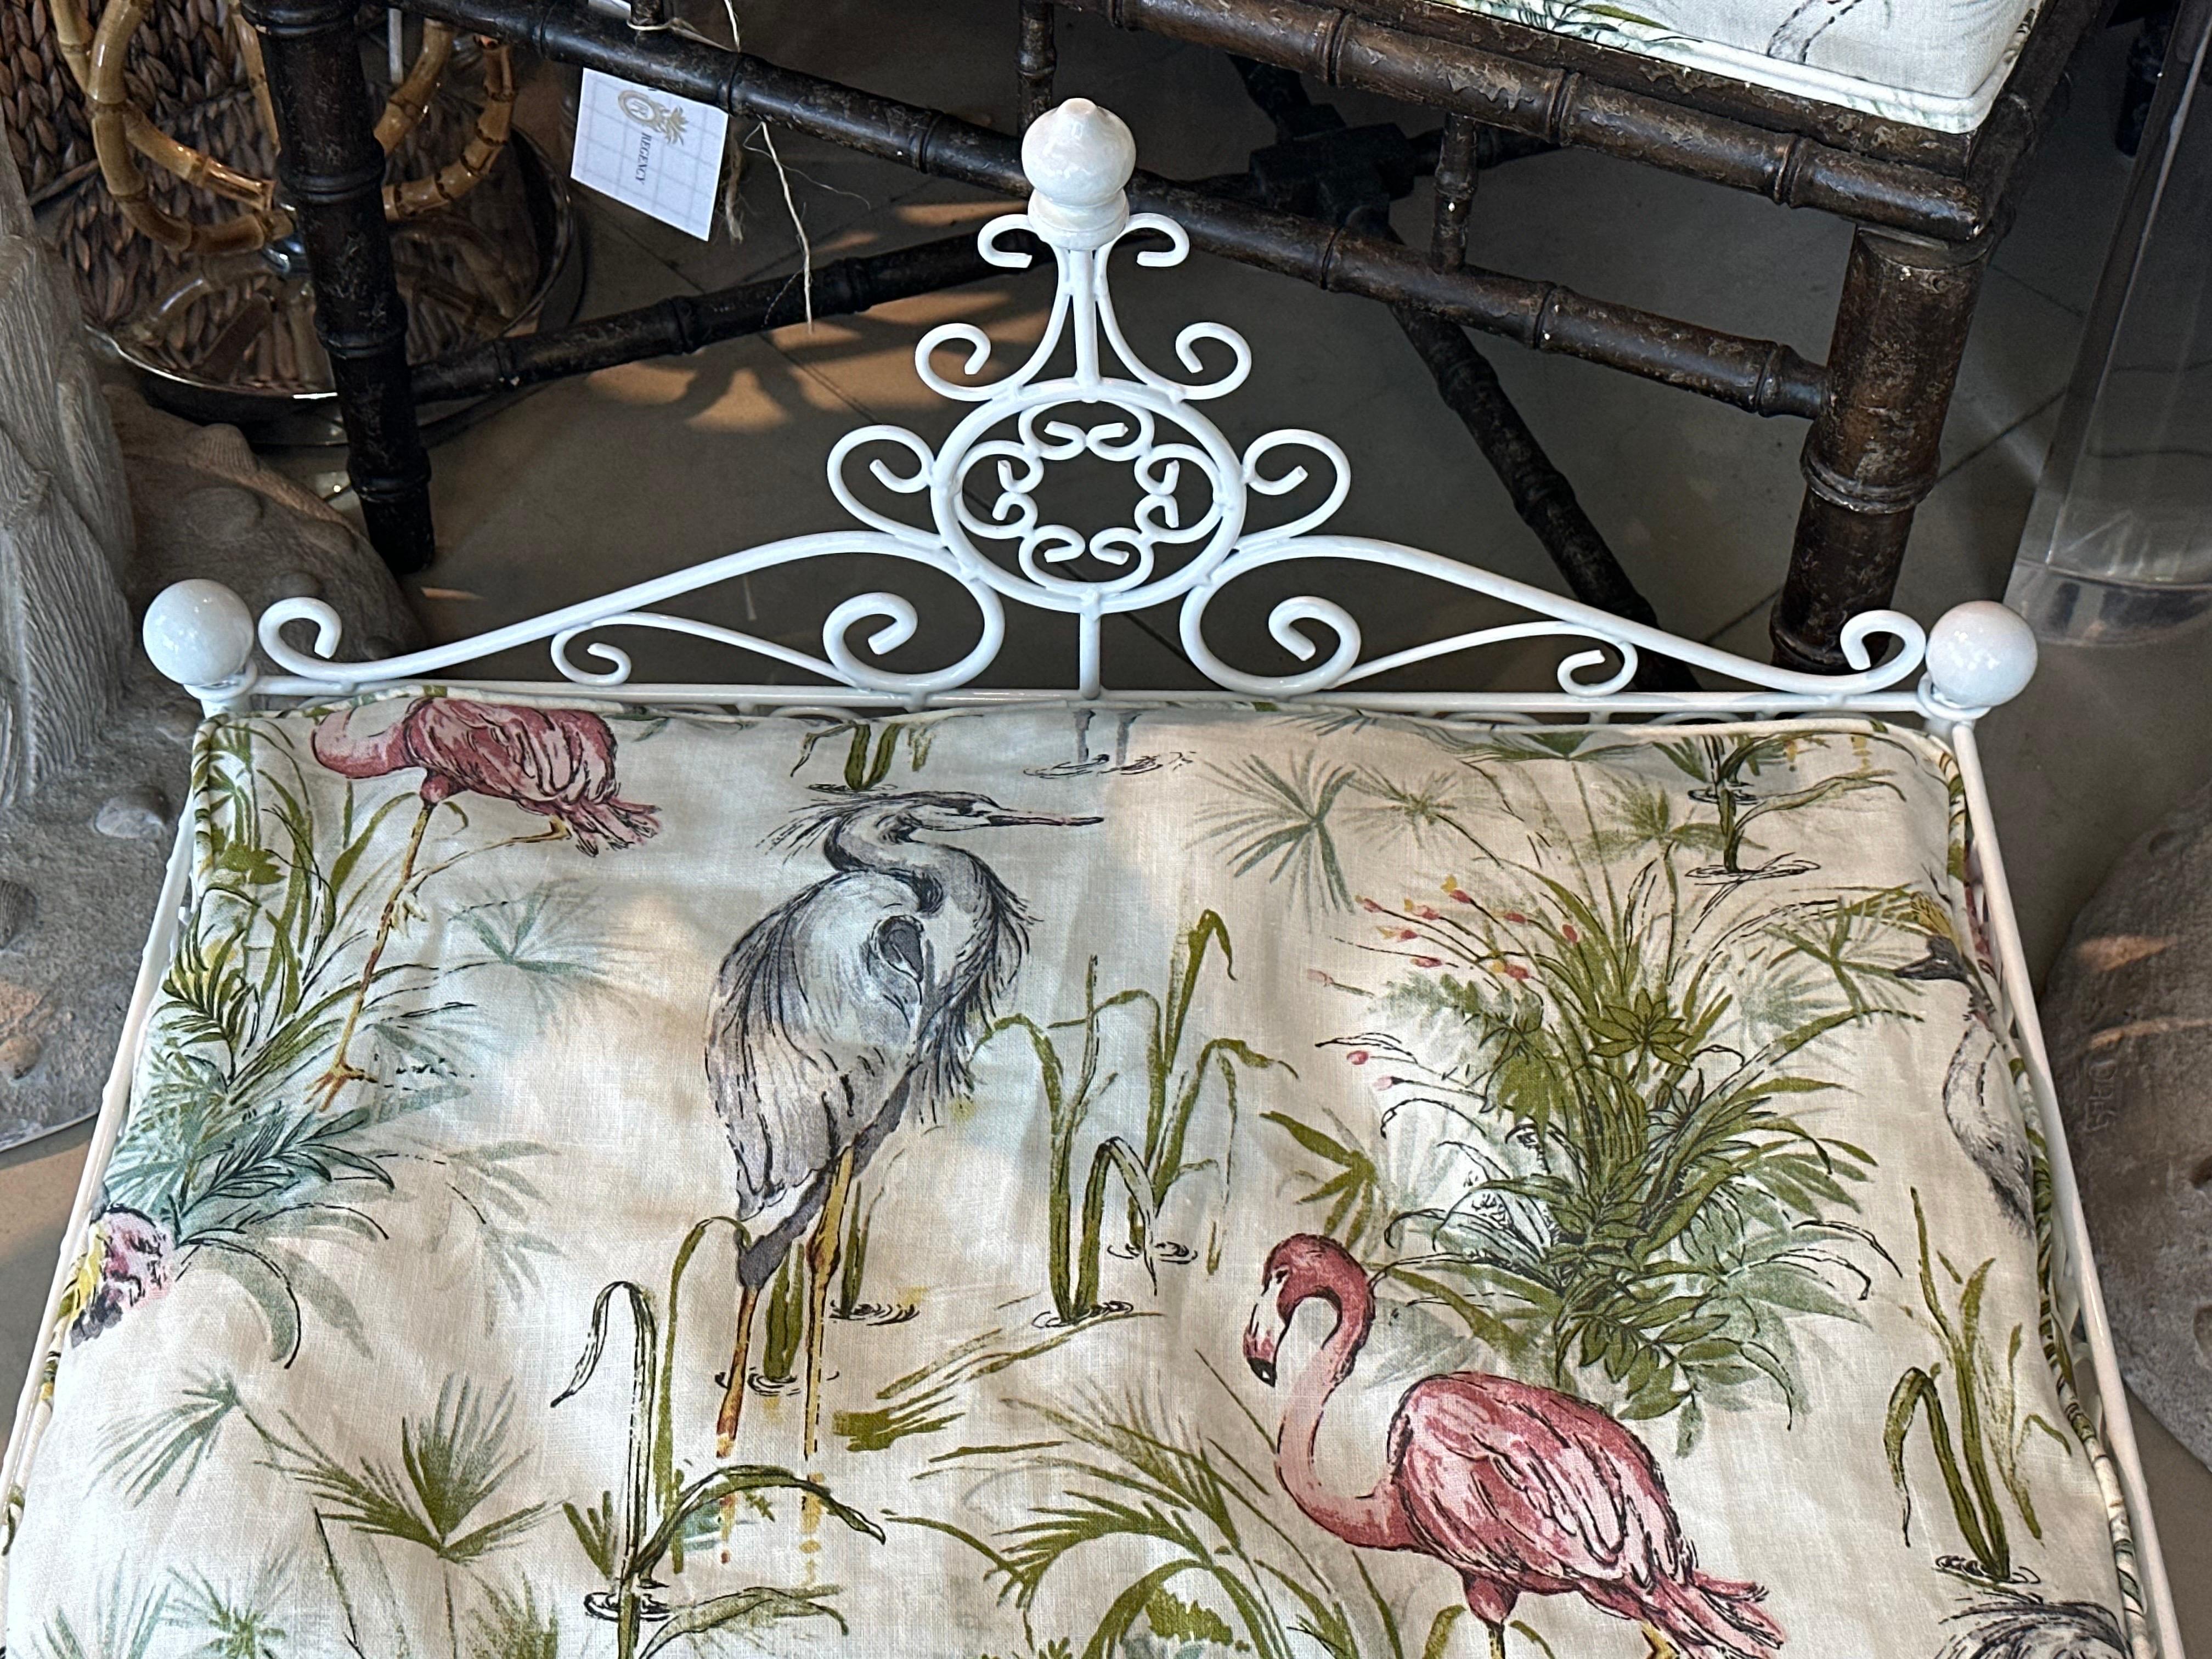 Beautiful vintage ornate metal pet dog bed. Newly powder-coated. New tropical bird, flamingo upholstery, new fill with removable insert for washing, zipper cover. Soft & comfy! Dimensions: 19.5 H x 20.5 D x 26.5 W. Please let me know if you would